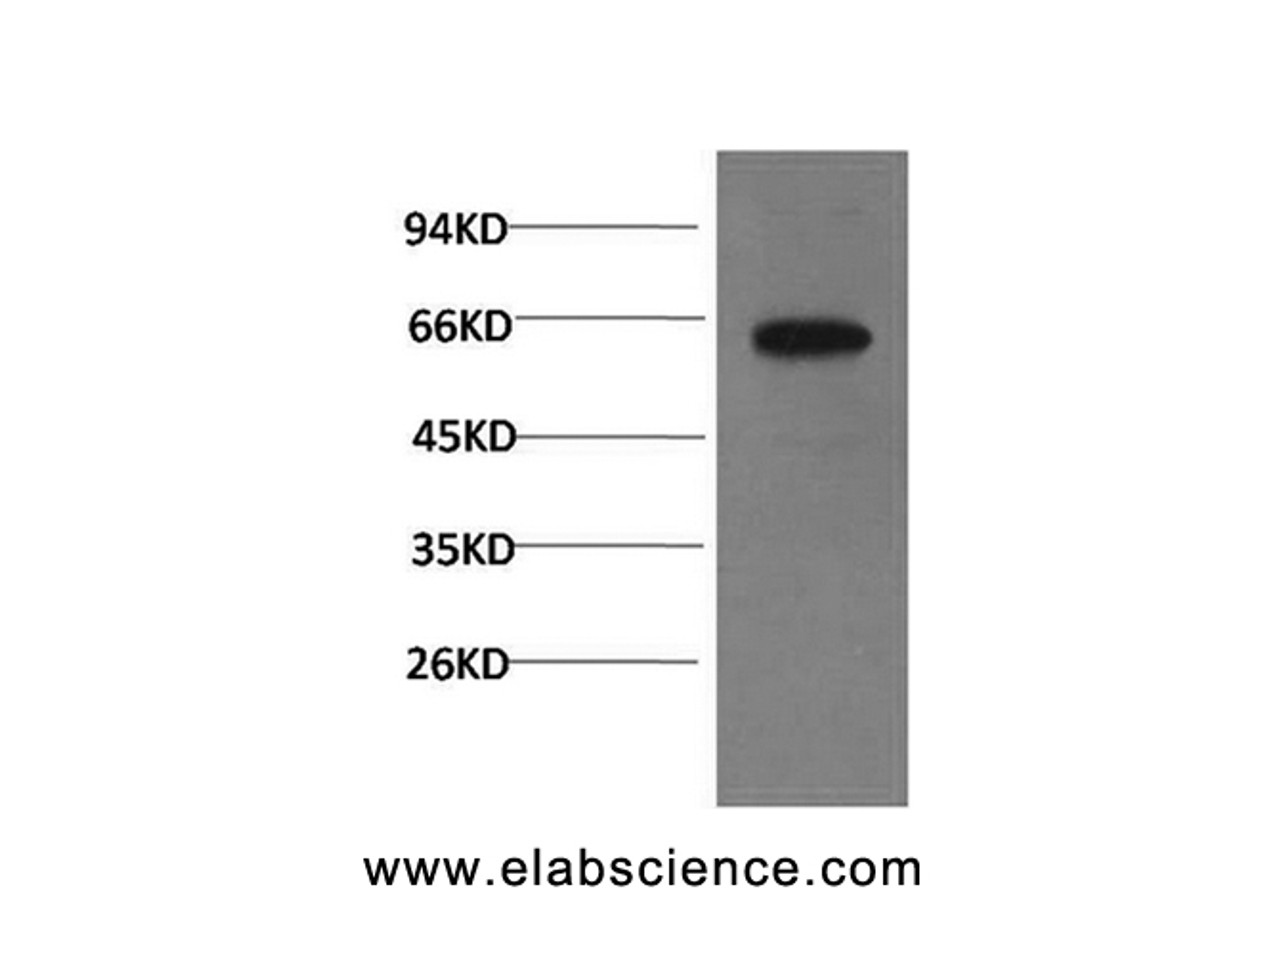 Western Blot analysis of PC-3 cells using Phospho-AKT1 (Ser473) Monoclonal Antibody at dilution of 1:1000